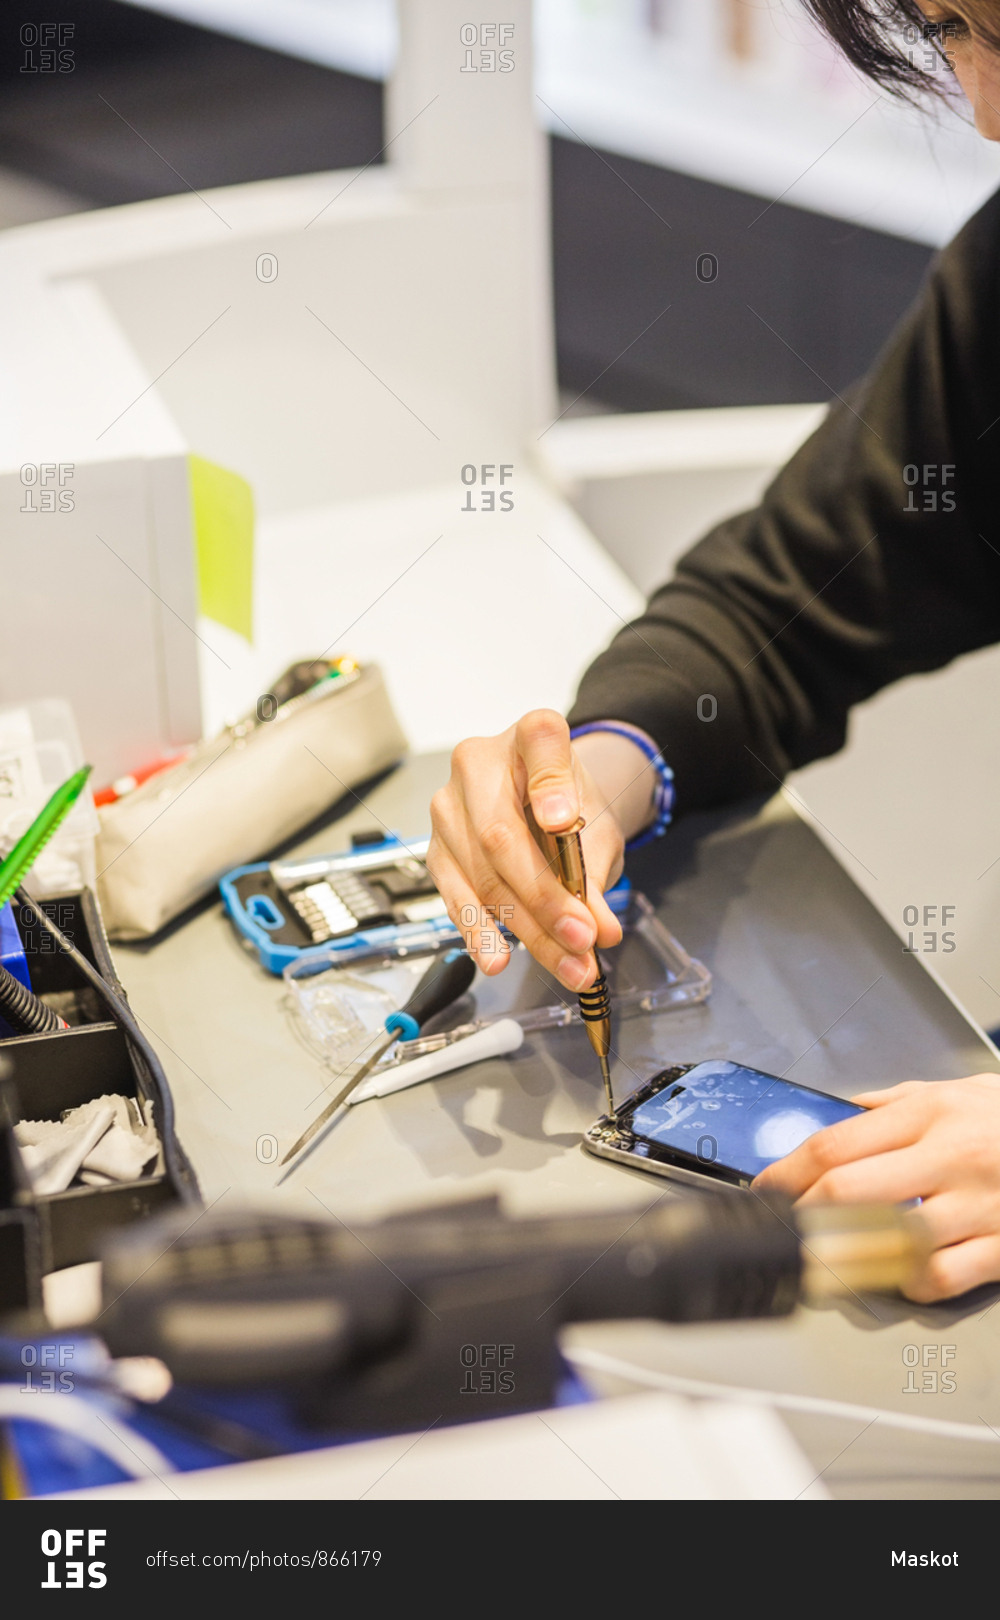 High angle view of young female employee repairing damaged smart phone at illuminated desk in mobile repair shop